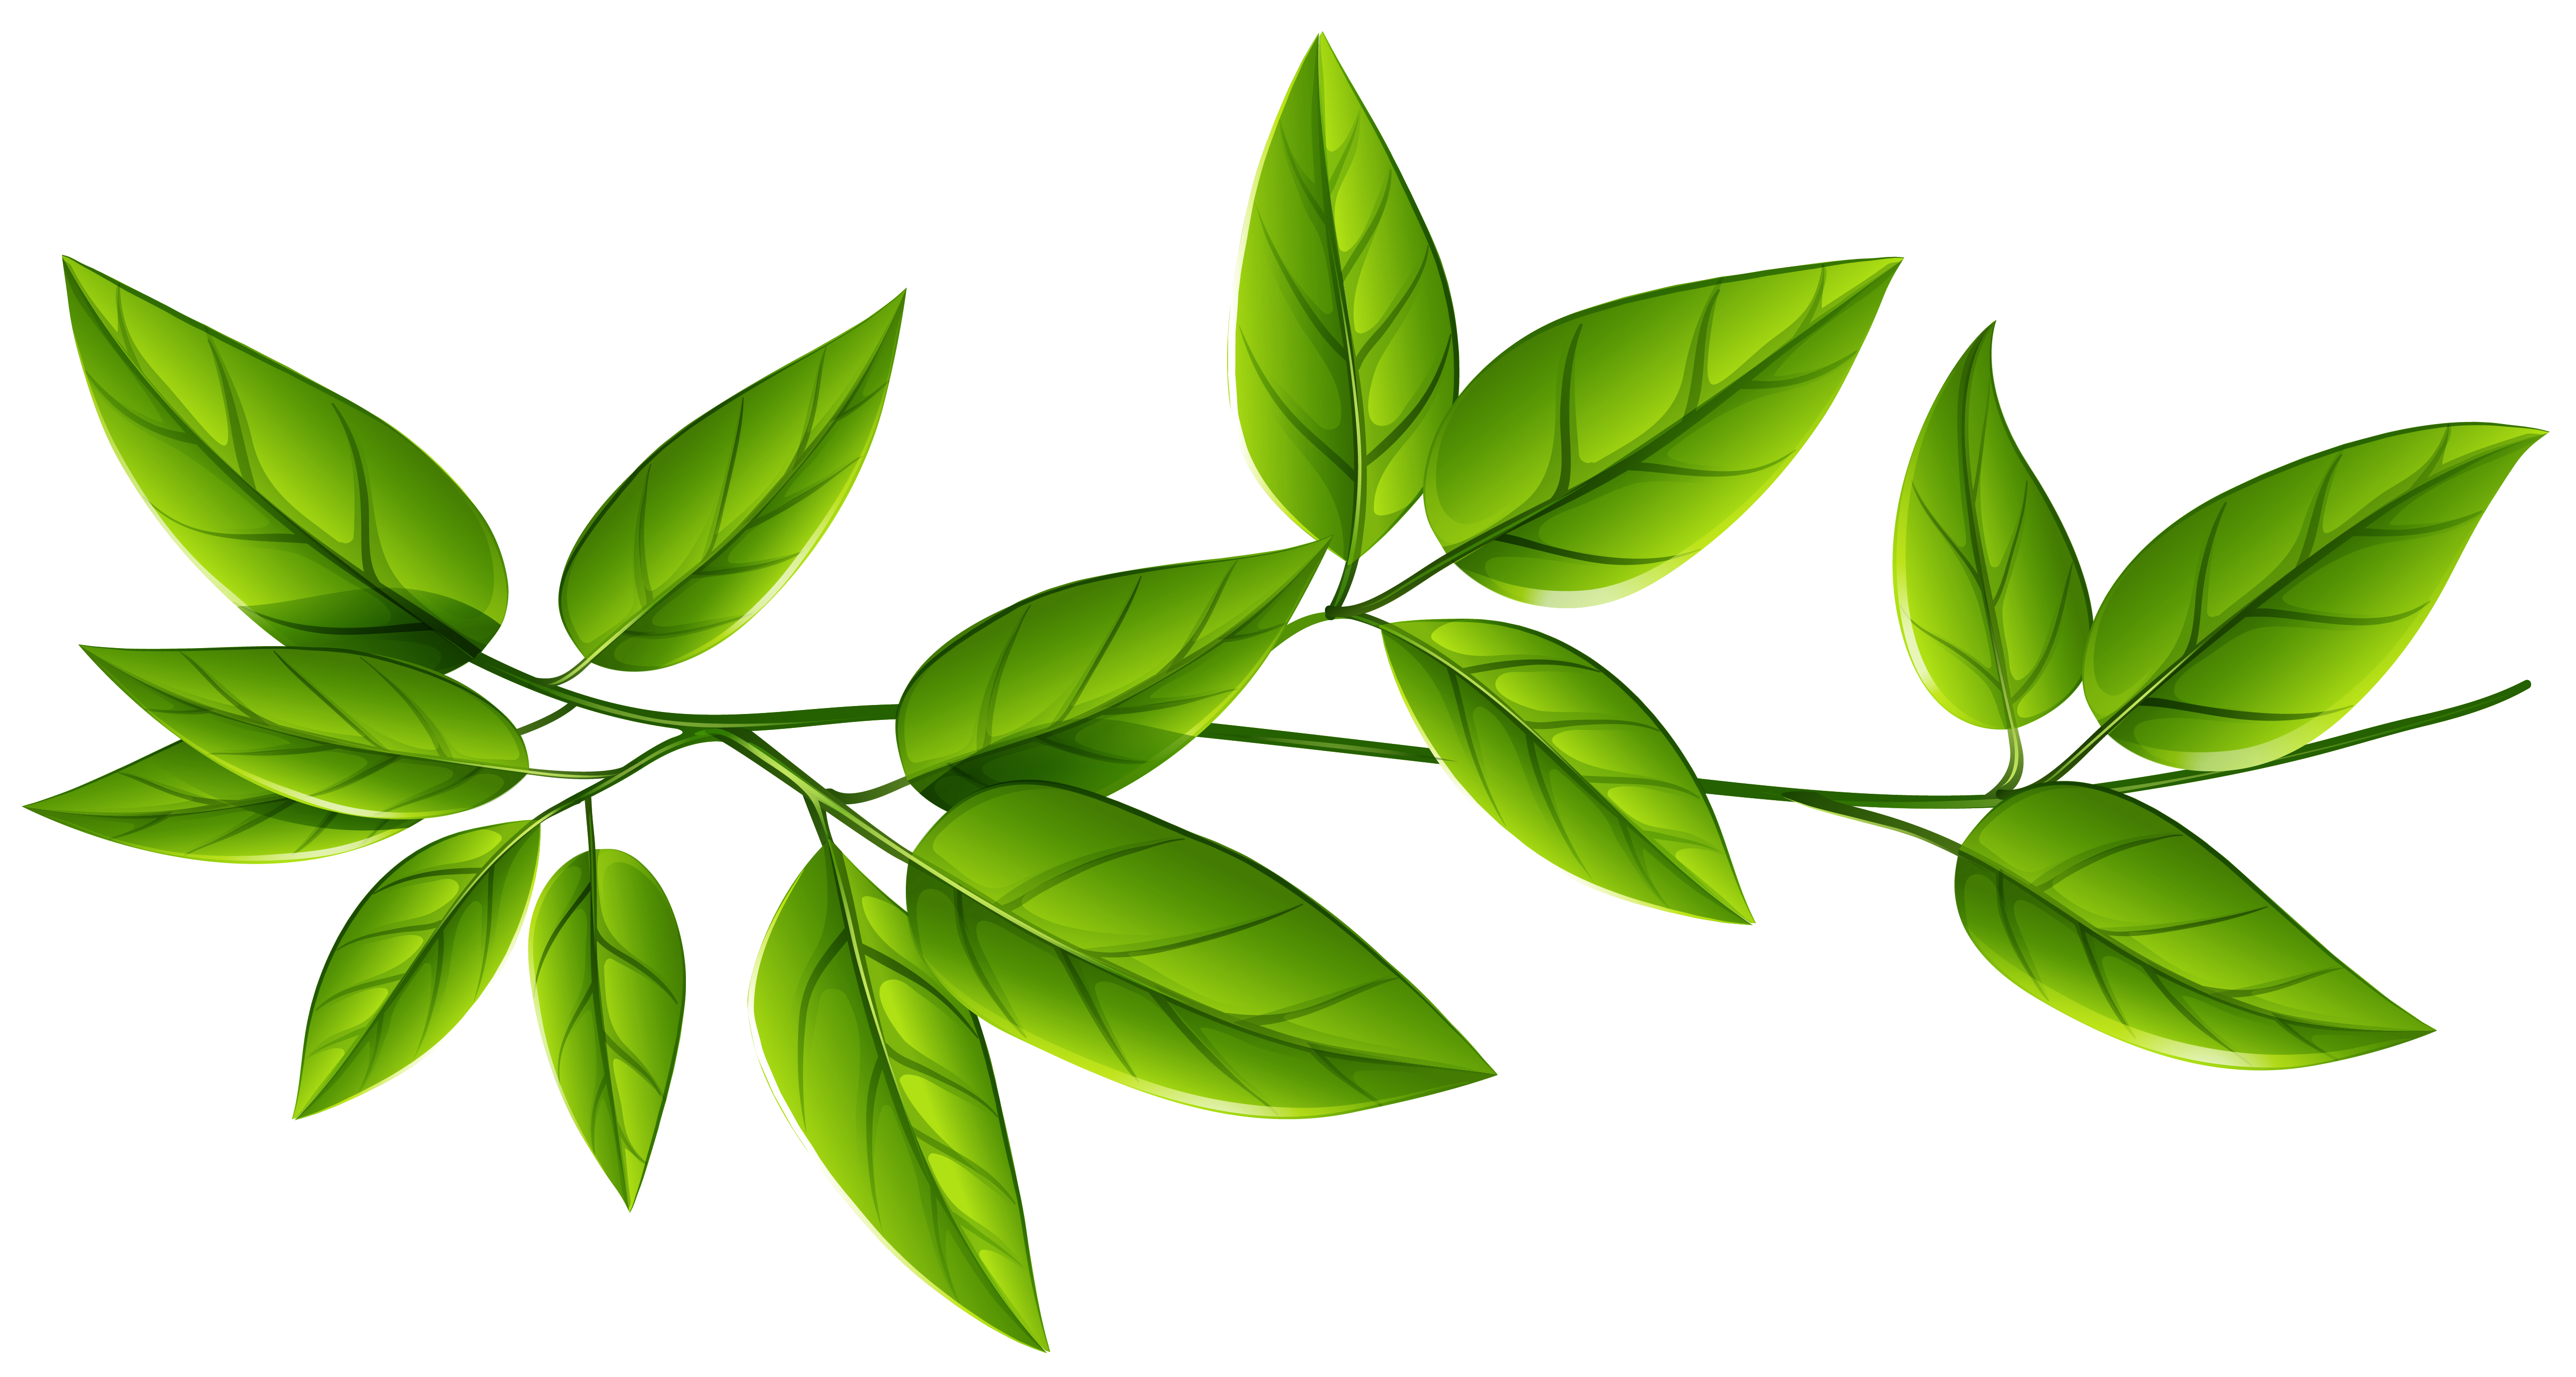 Green leaves background clipart - Clipground